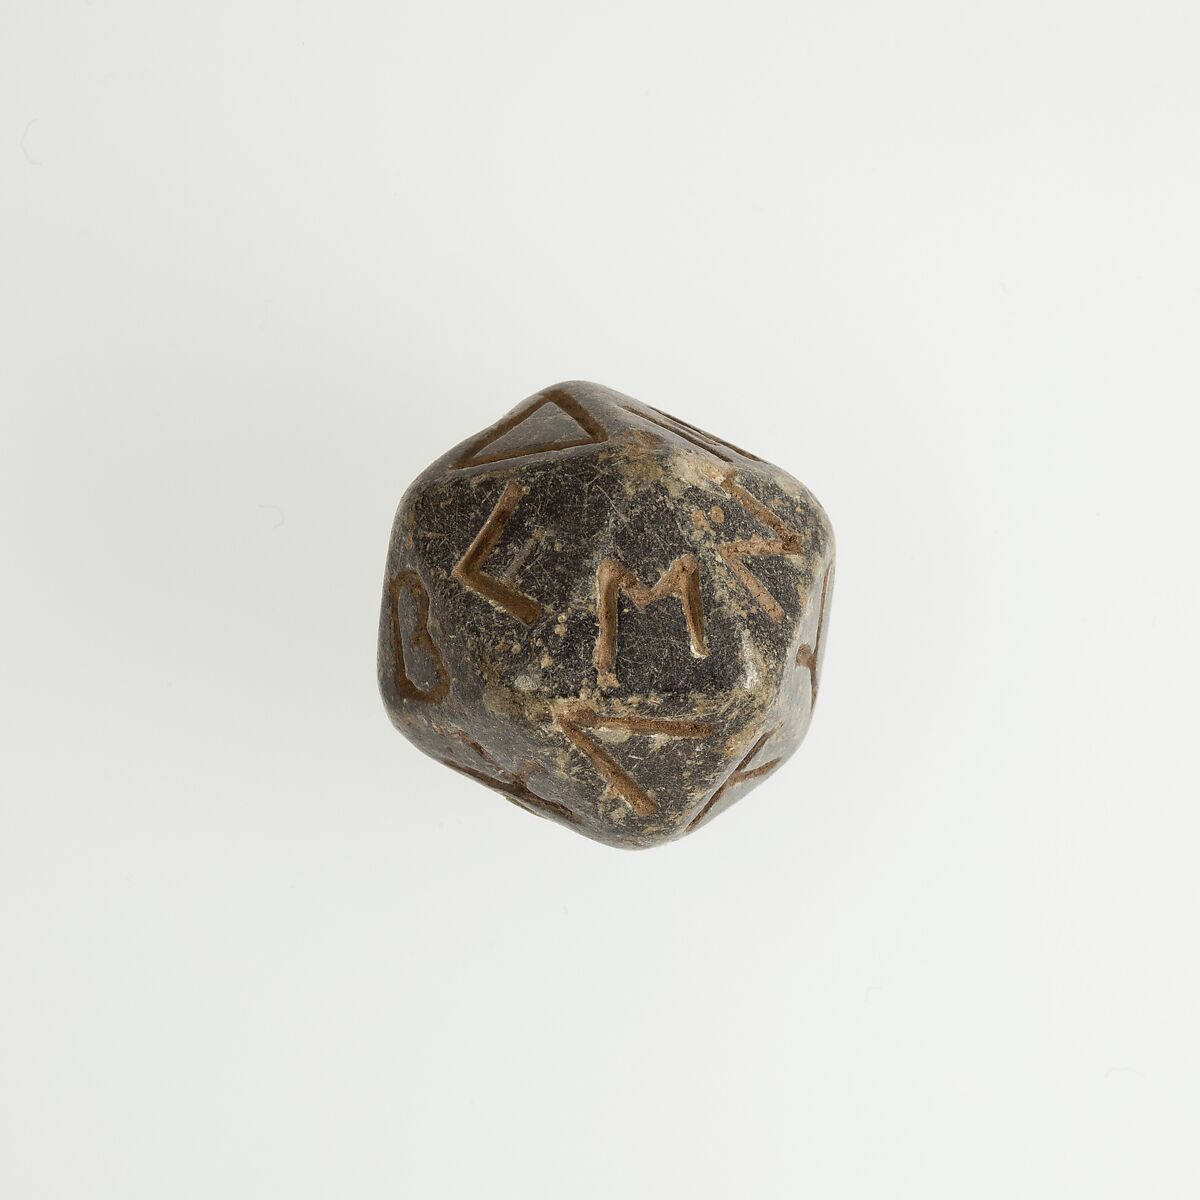 Twenty-sided die (icosahedron) with faces inscribed with Greek letters, Serpentinite 